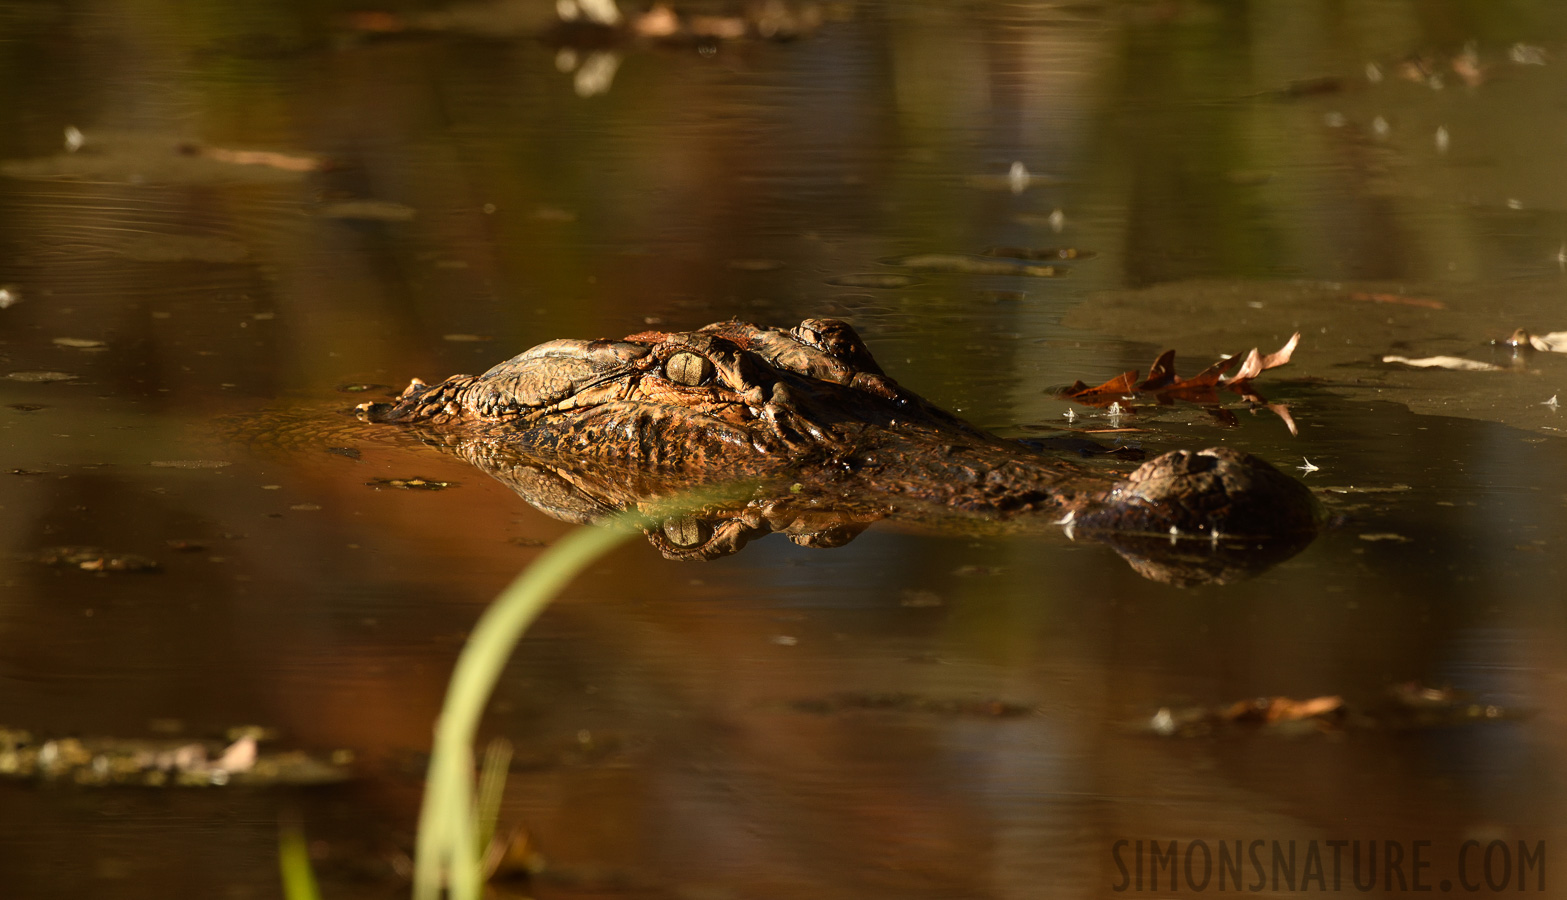 Alligator mississippiensis [400 mm, 1/1000 sec at f / 7.1, ISO 800]